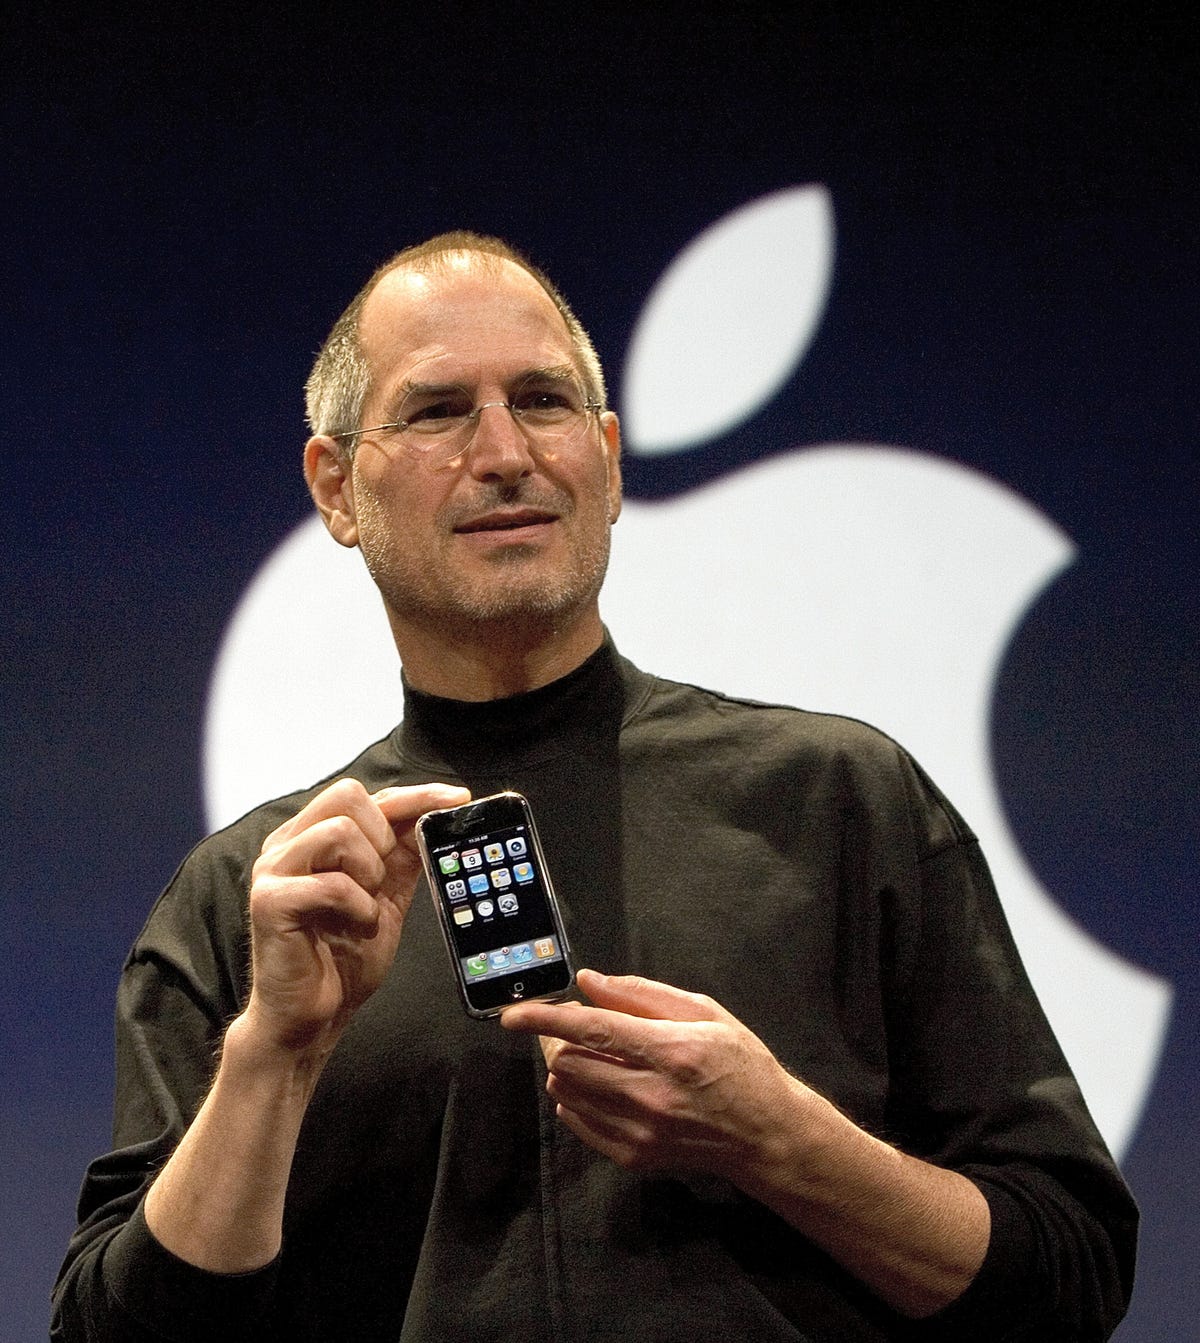 15 Years Ago: The Day Steve Jobs and the iPhone Made History
                        Commentary: From the moment he took the stage, Apple's co-founder knew the iPhone would change everything. Here's what I remember from that event.